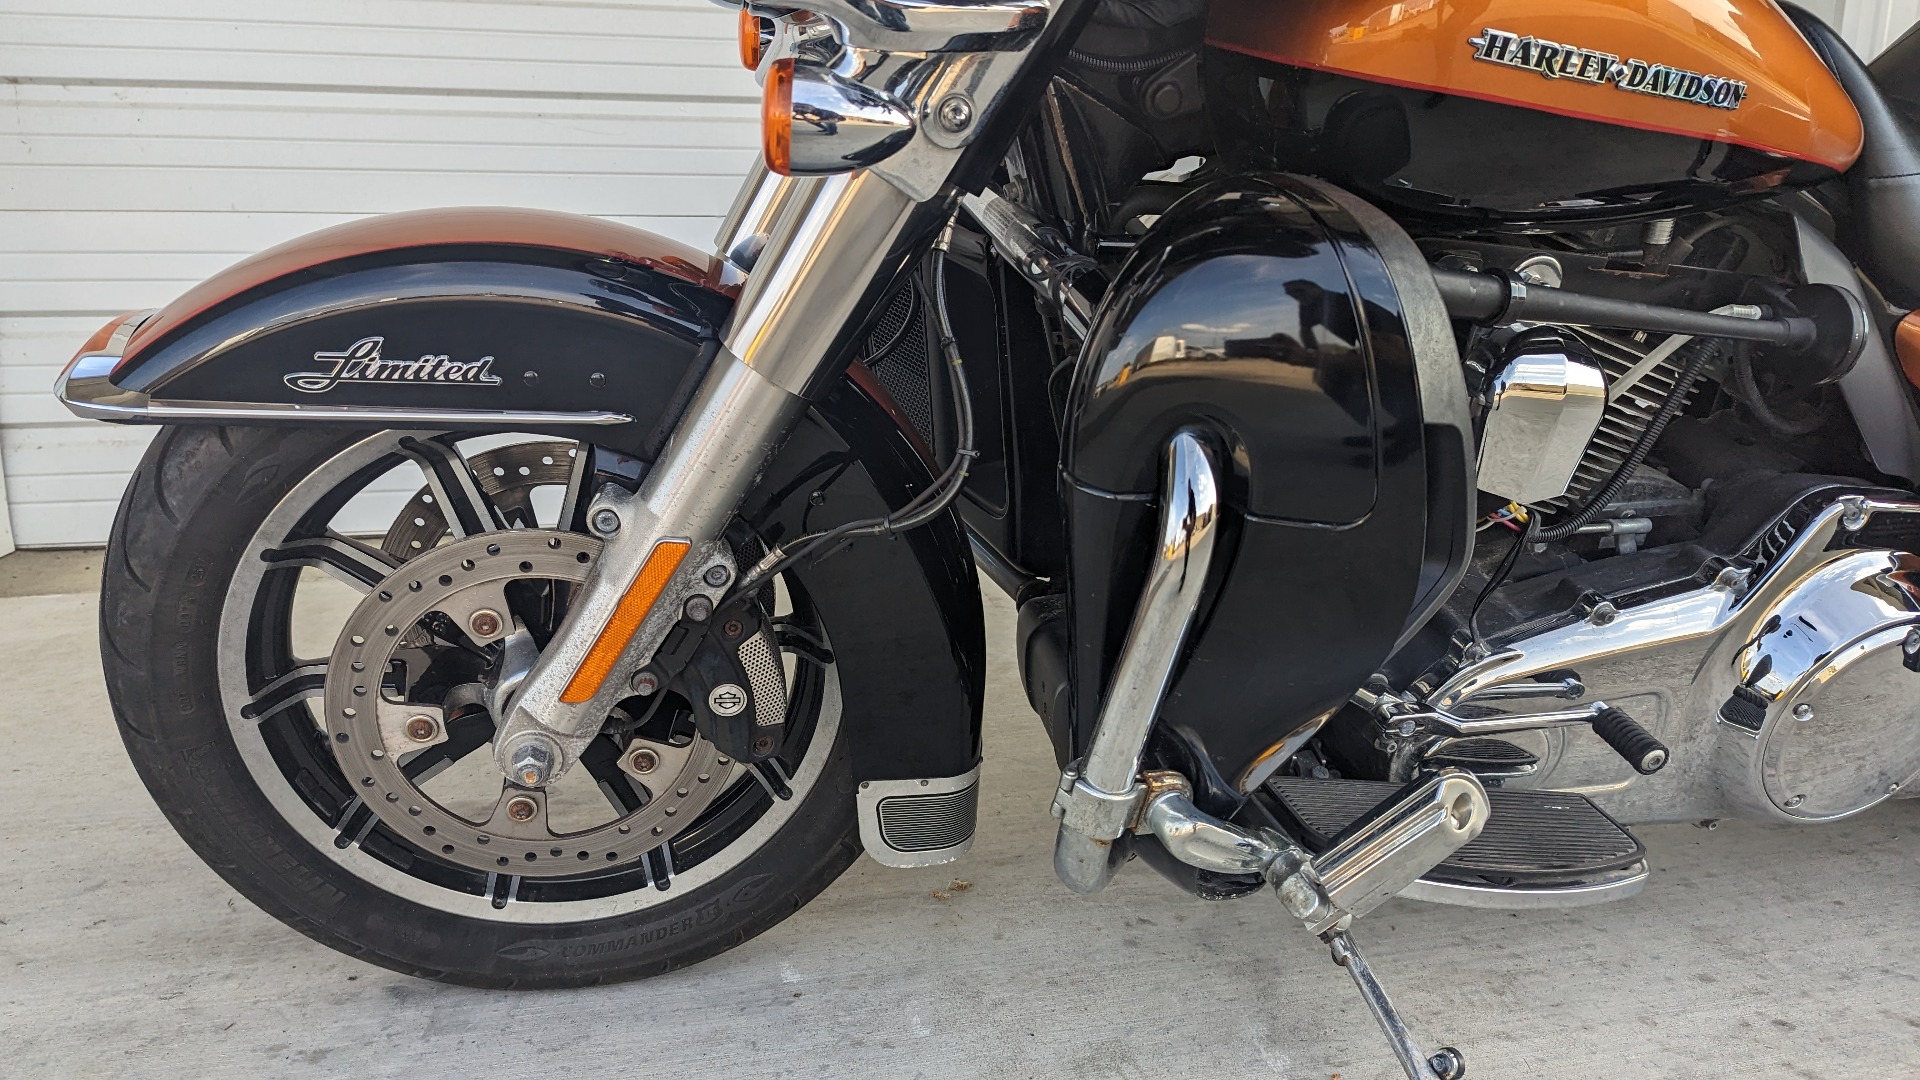 2014 harley davidson ultra limited for sale in arkansas - Photo 6